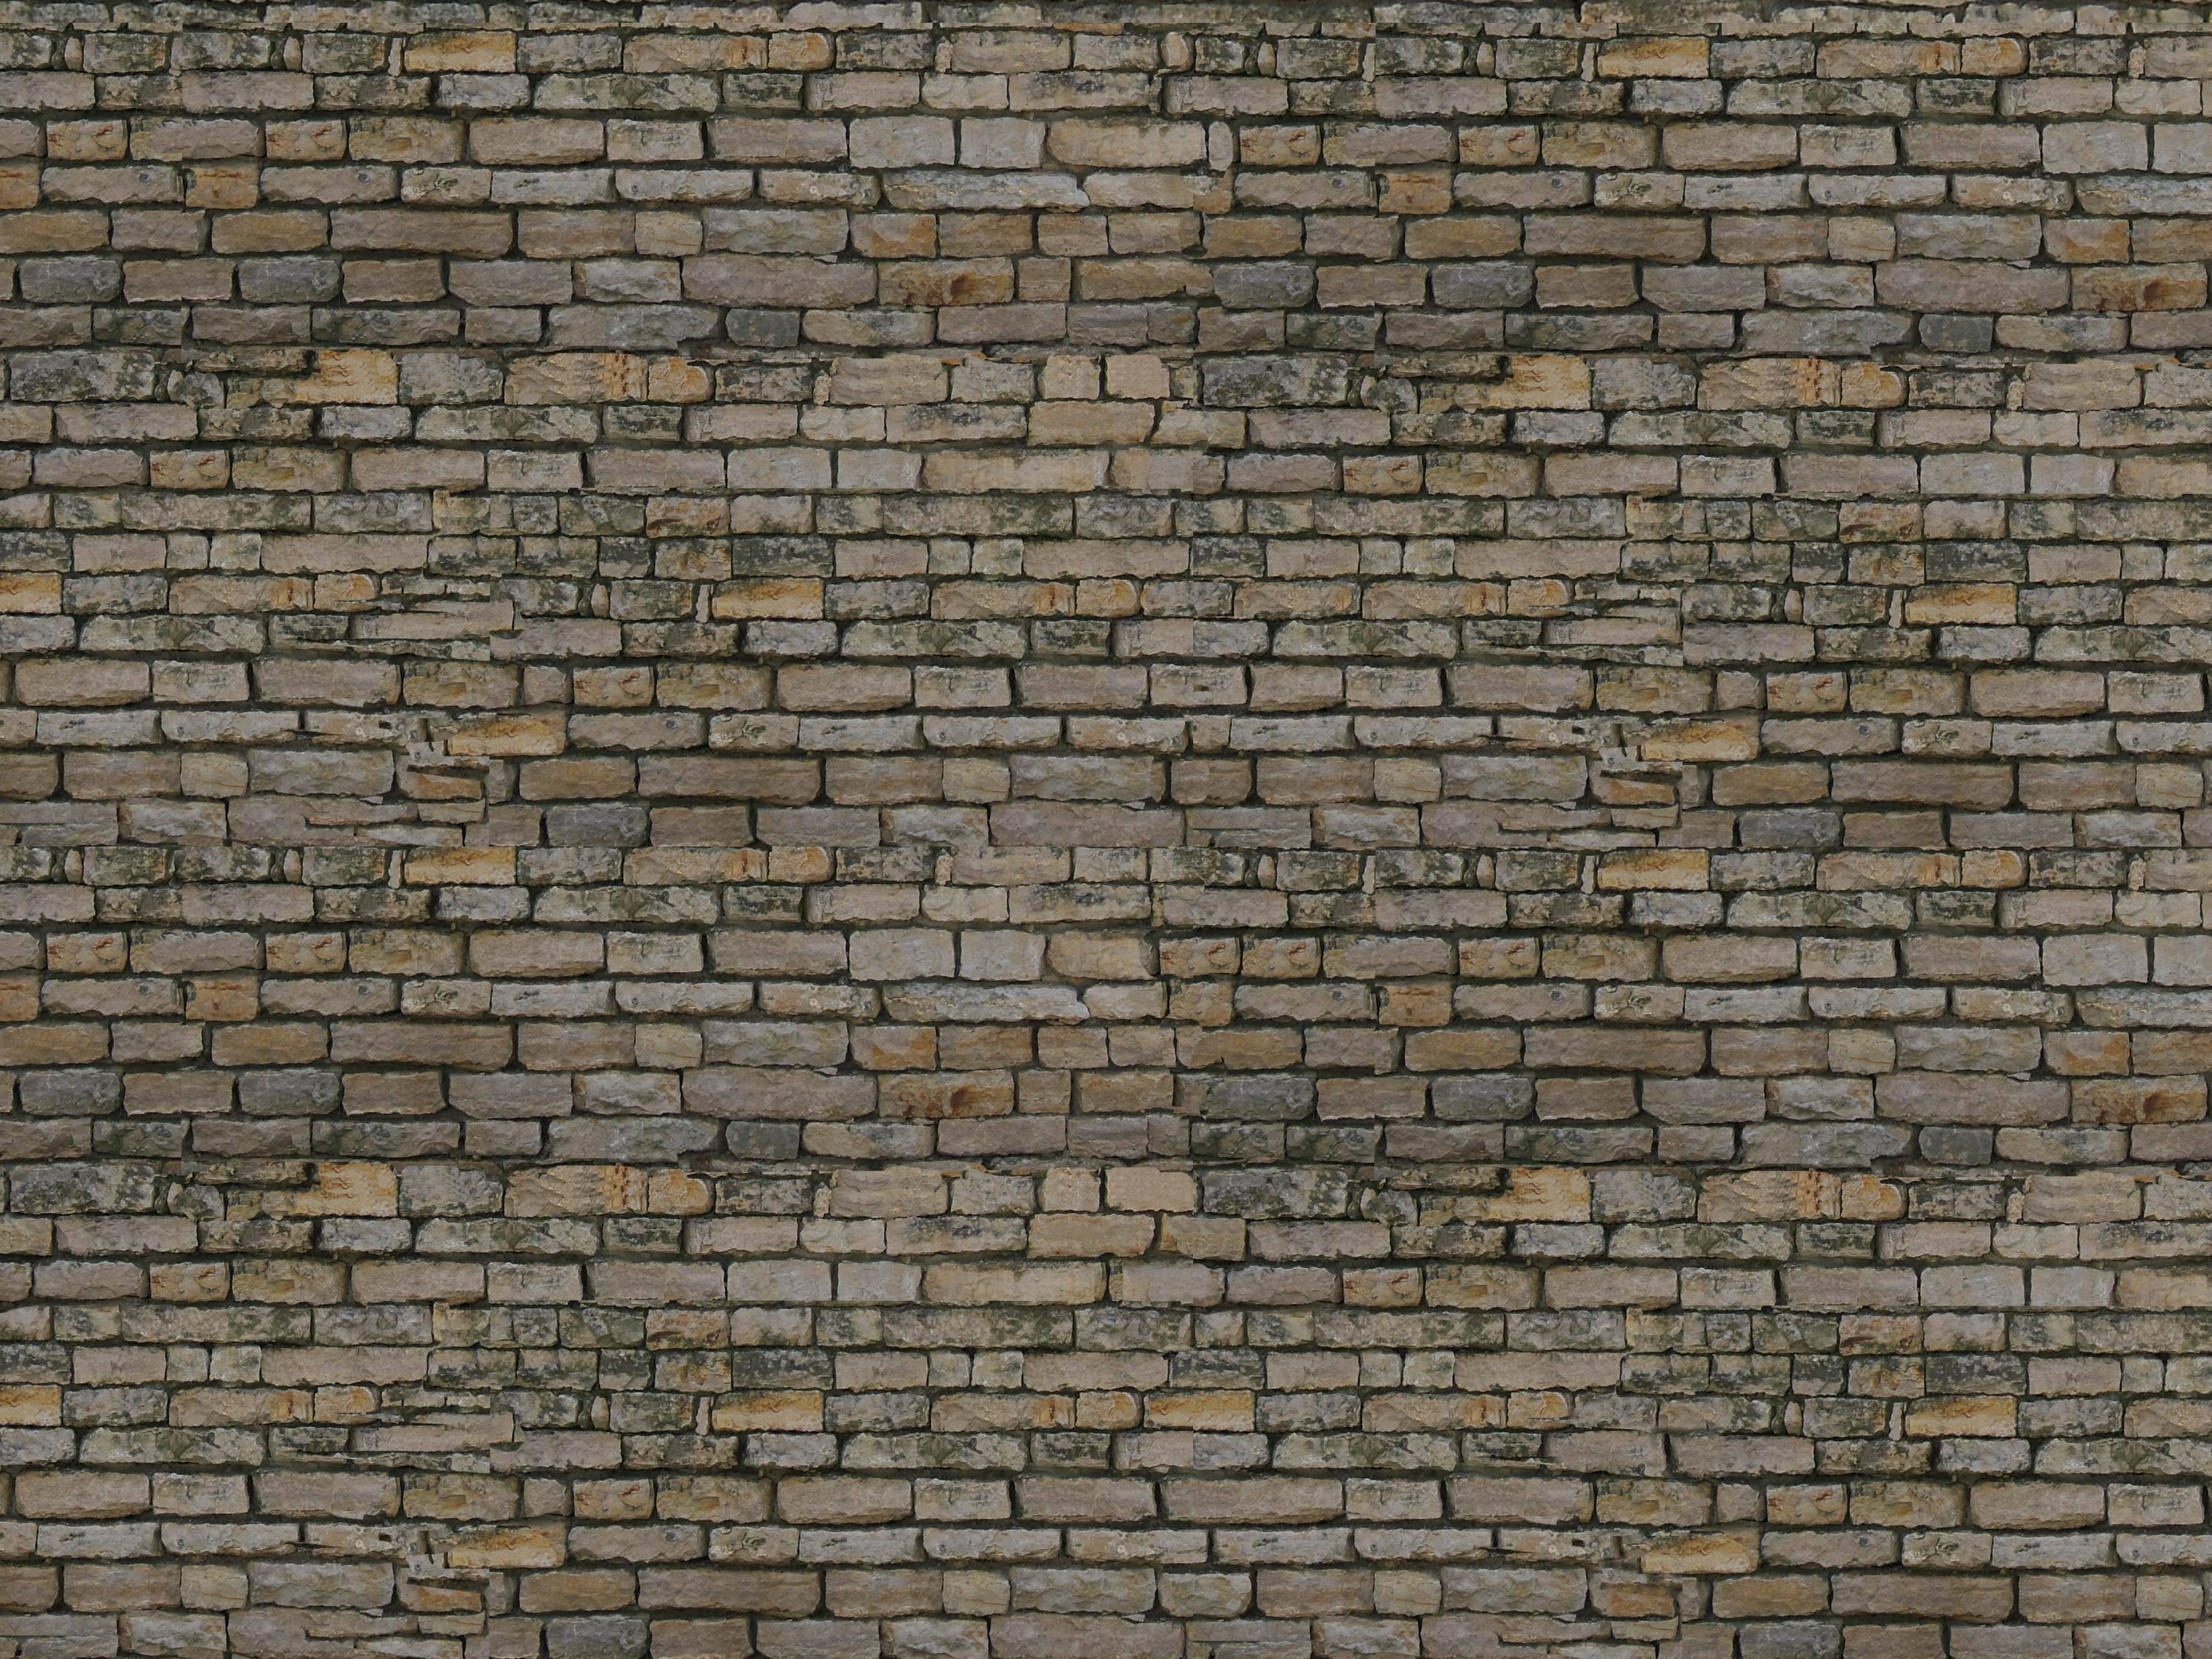 5-sheets-brick-stone-wall-paper-21x29cm-o-scale-bumpy-embossed-6-o